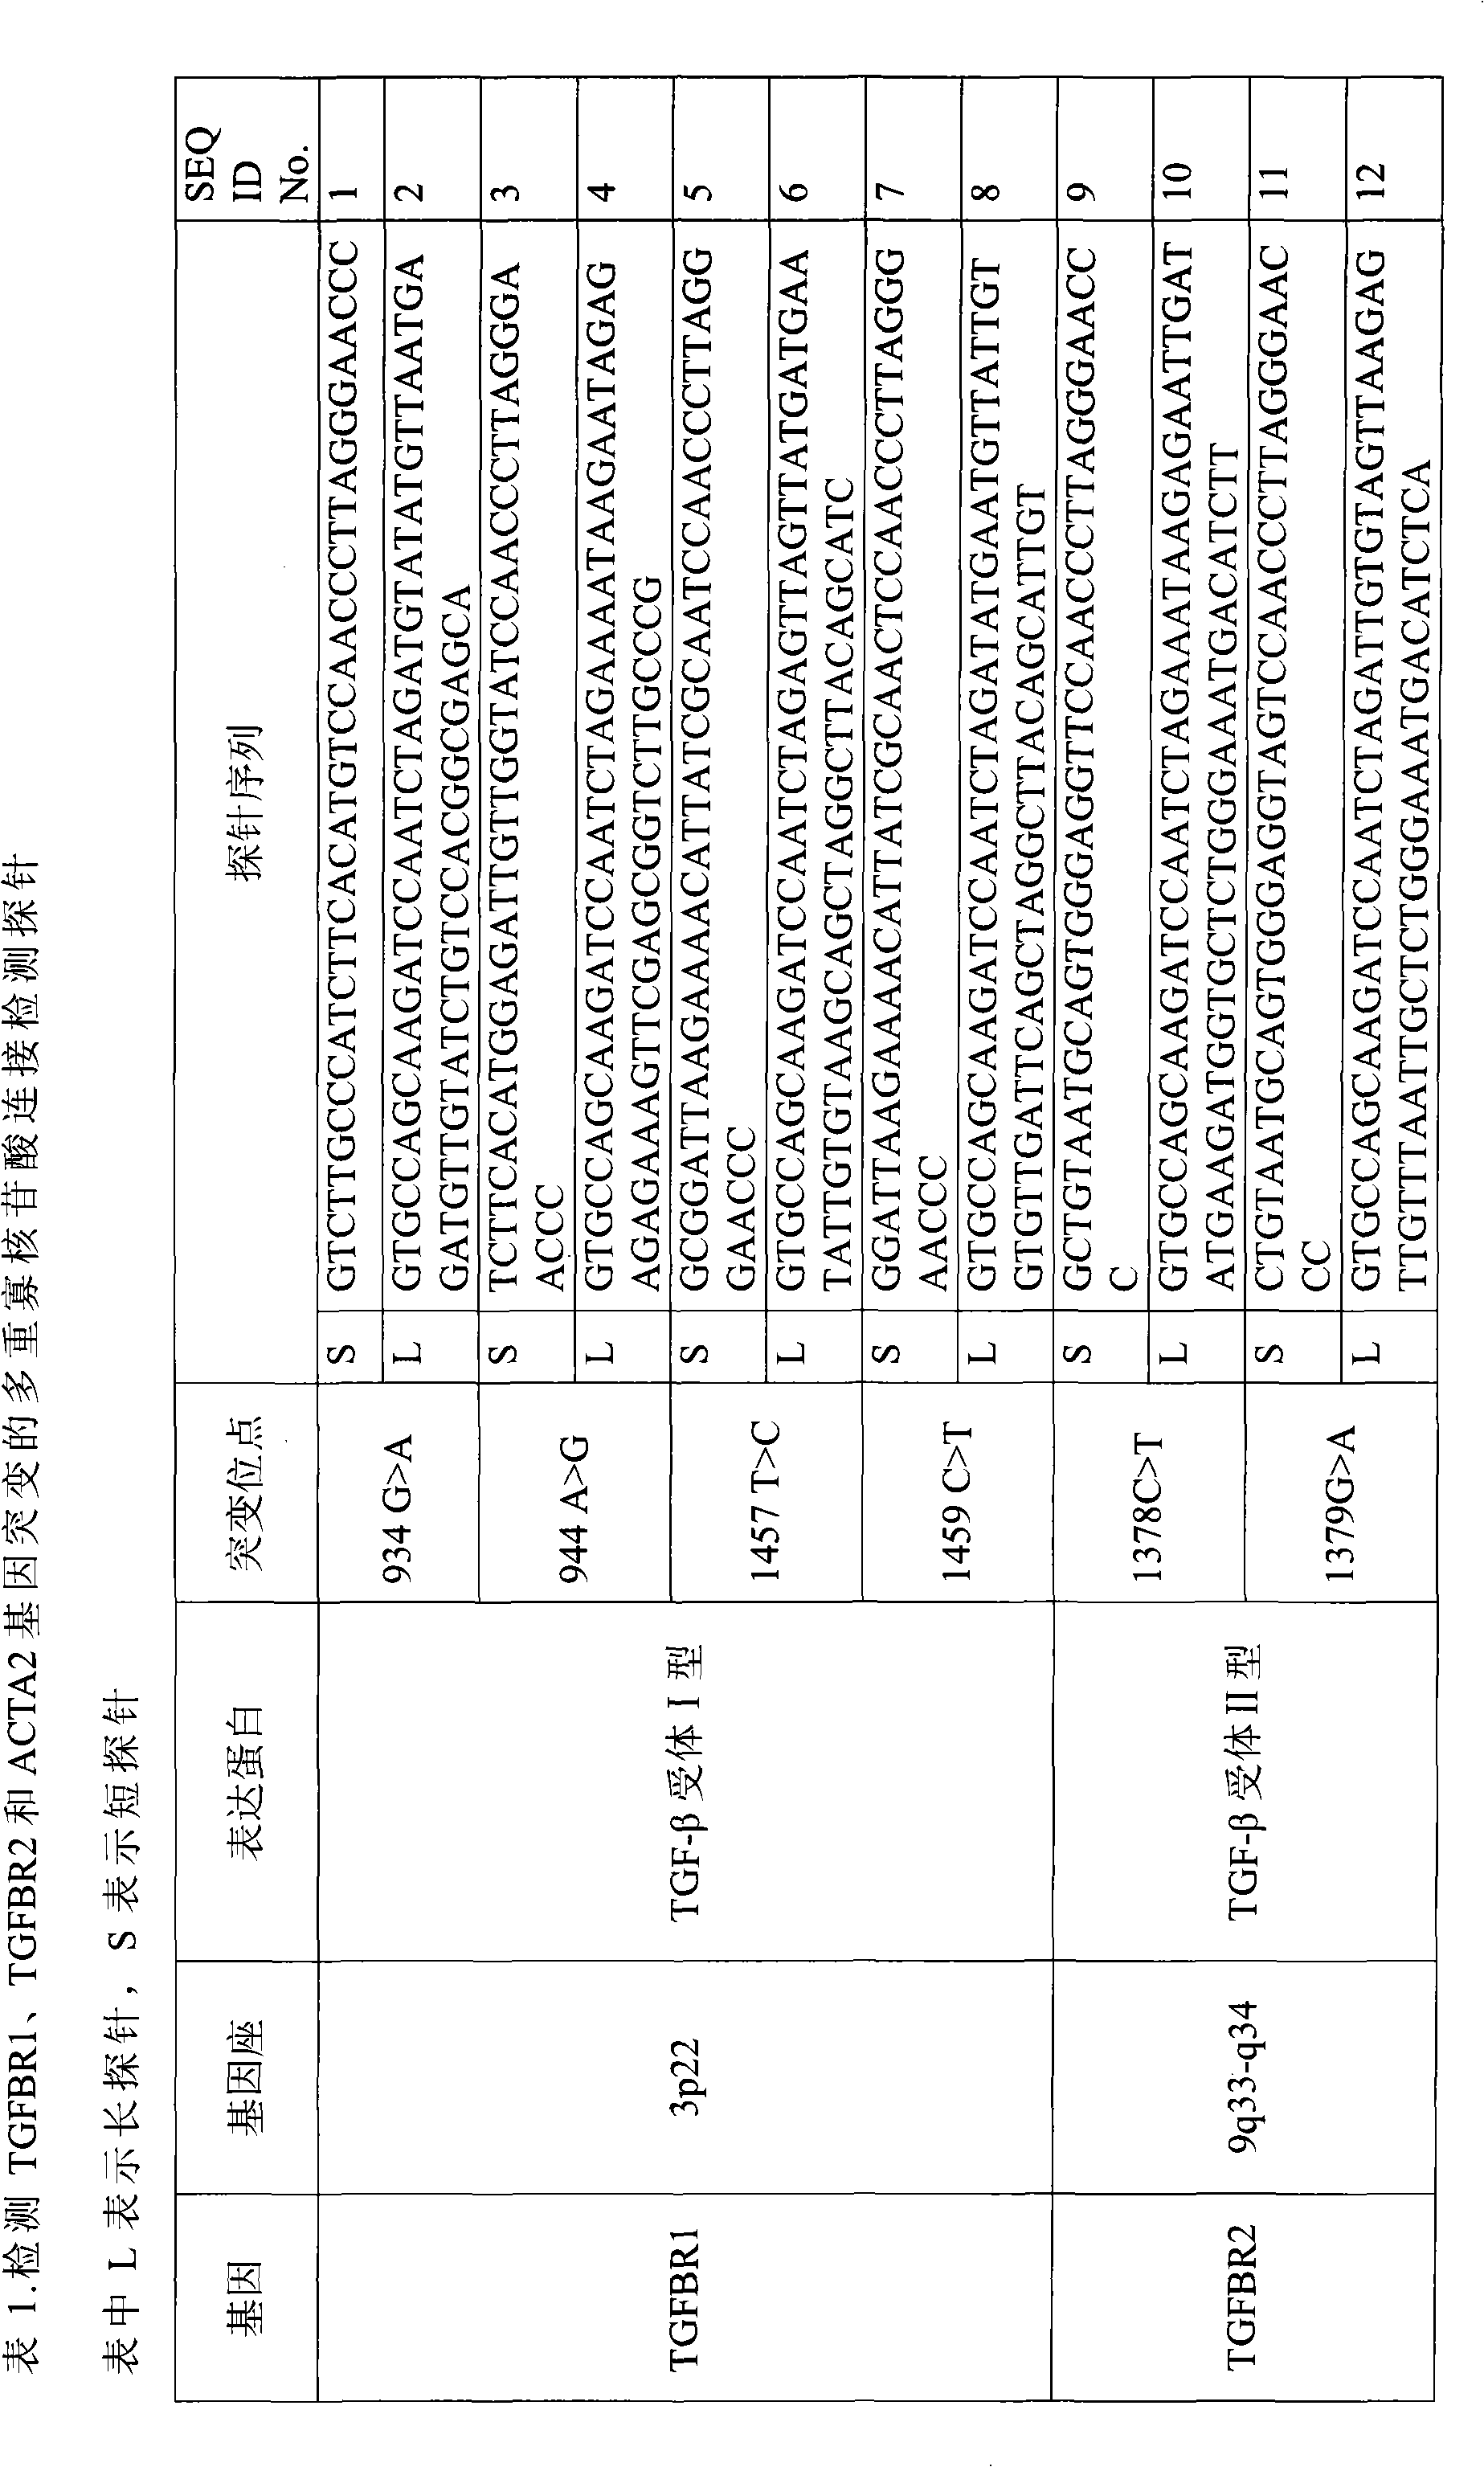 Method for detecting hereditary thoracic aortic aneurysm and dissecting associated gene mutation